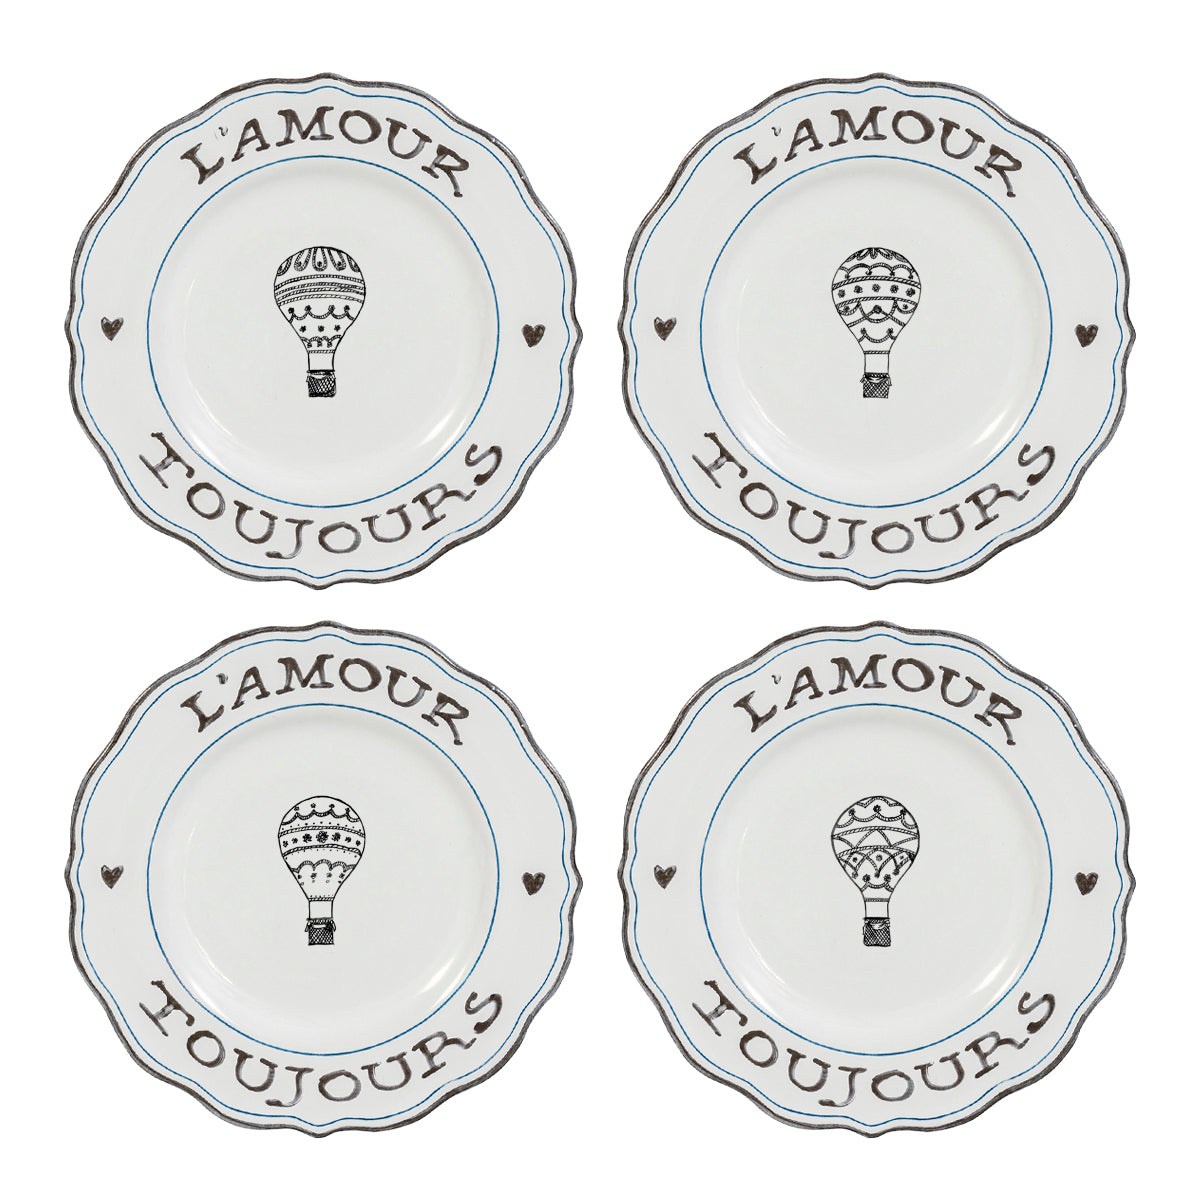 L'Amour Toujours Dessert/Salad Plates - Assorted Set of 4